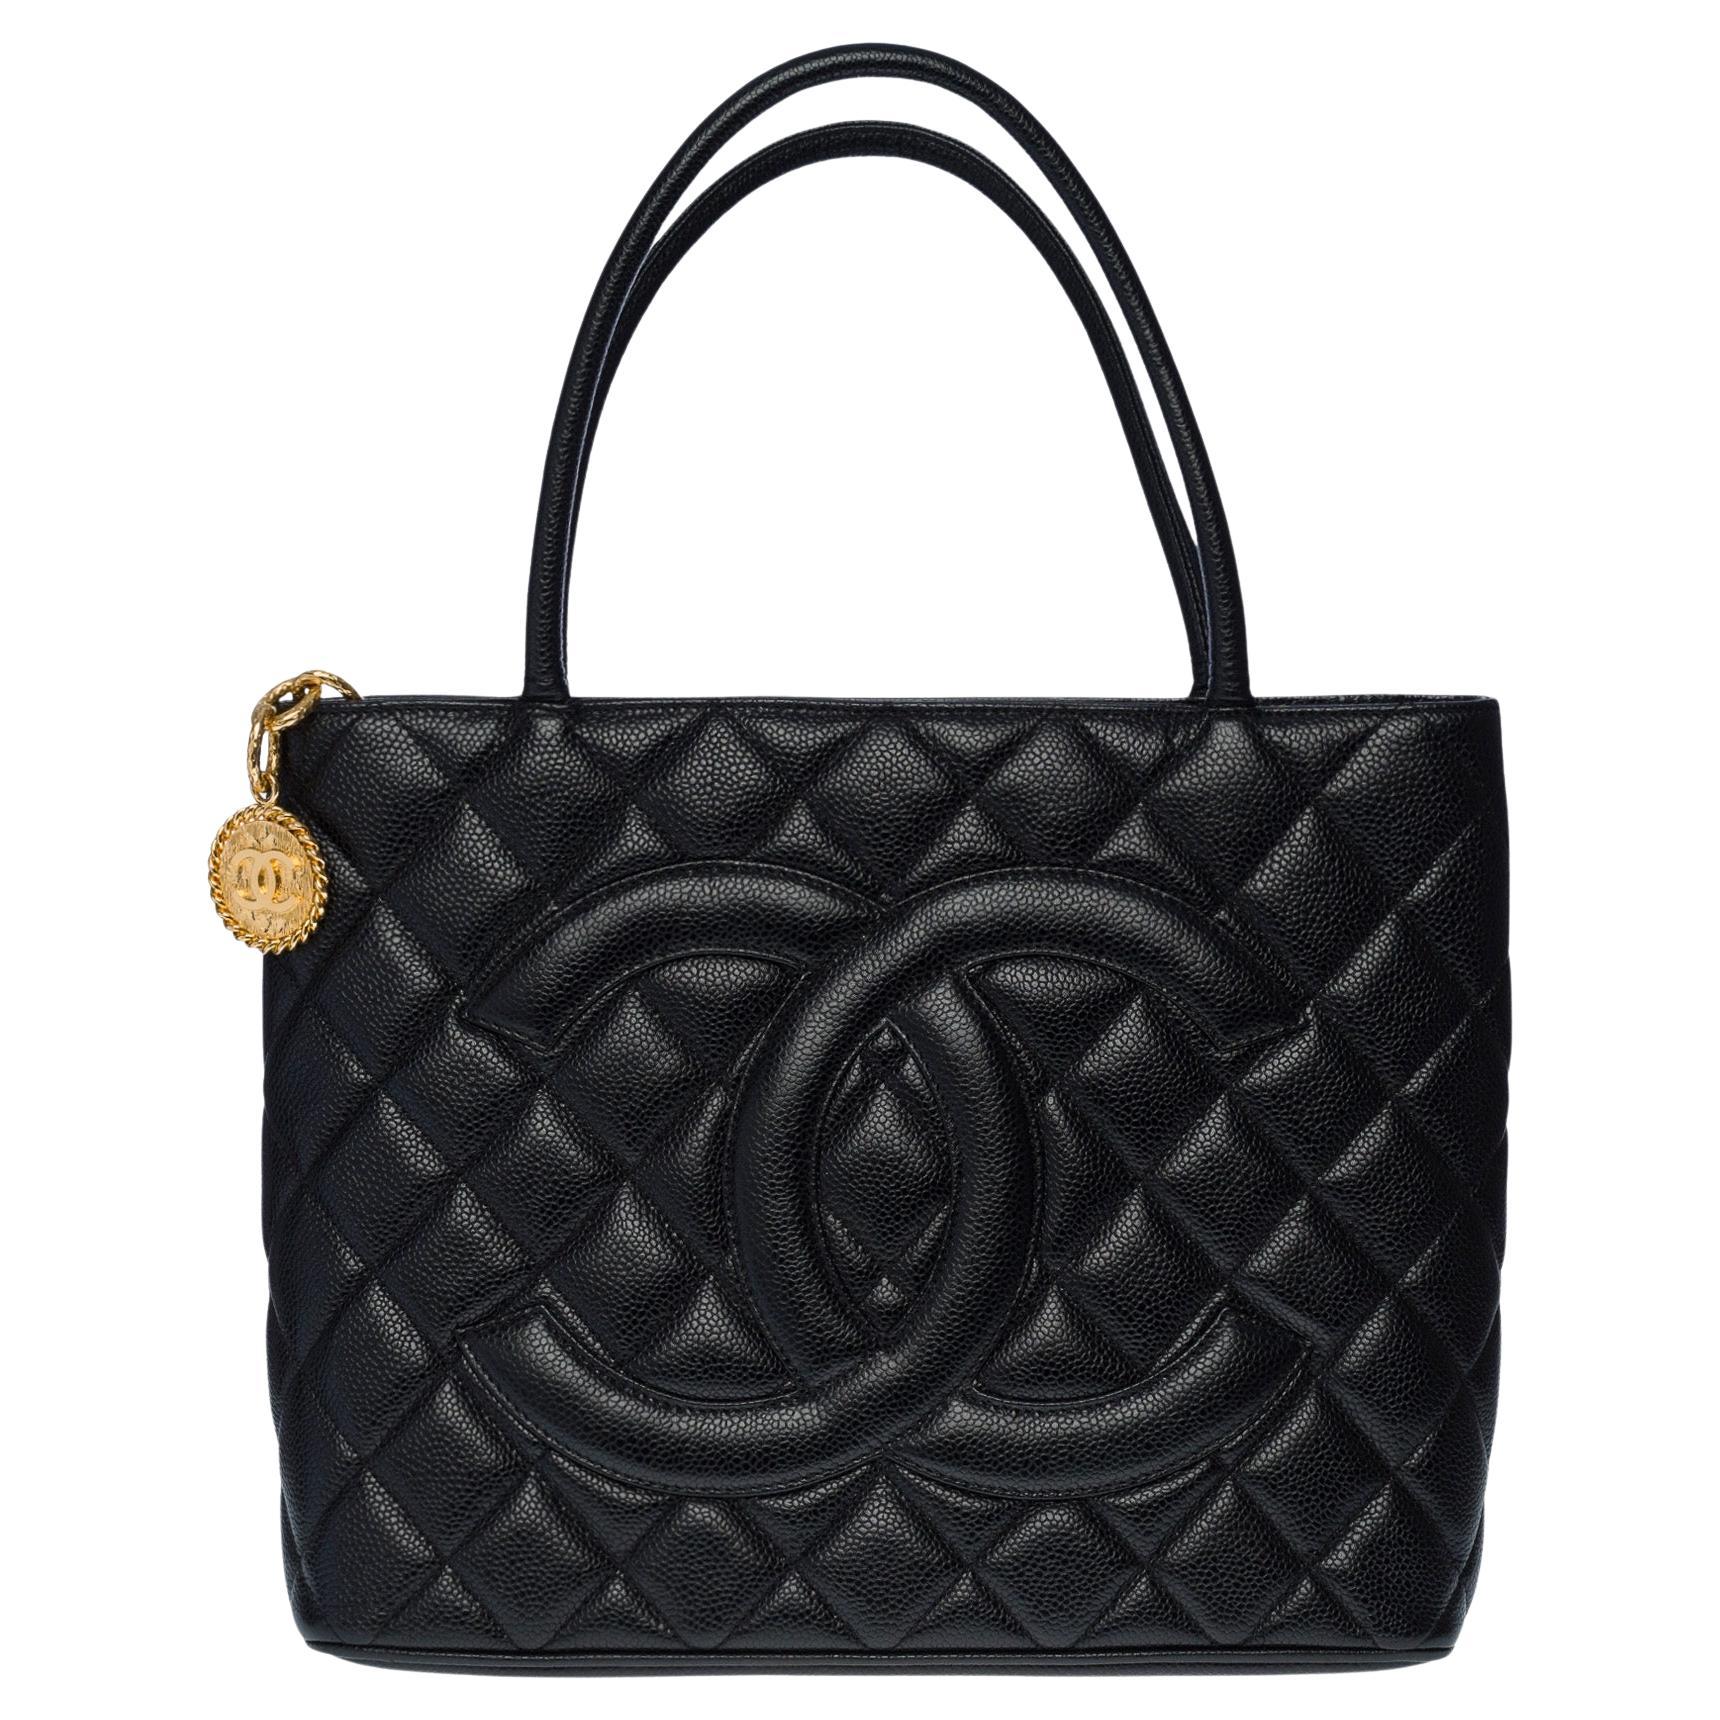 Beautiful Chanel Medaillon Tote bag in black caviar leather, GHW For Sale